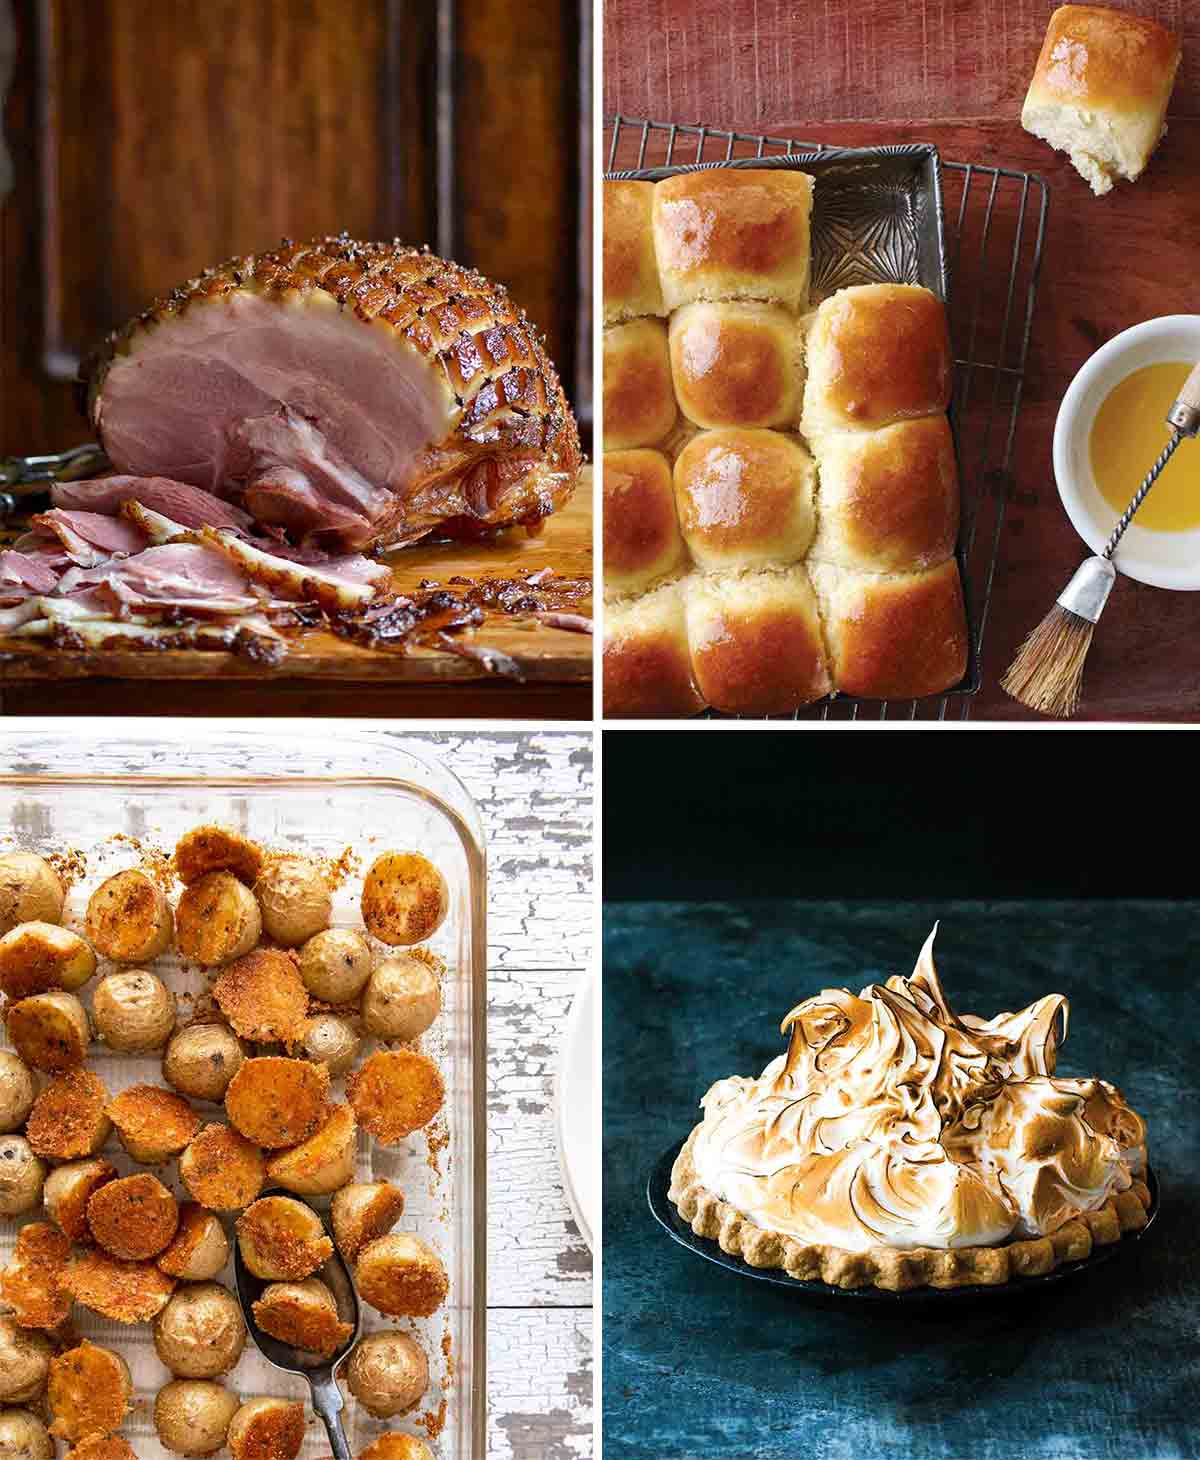 A glazed ham, and tray of dinner rolls, a baking dish filled with crispy potatoes, and a lemon meringue pie.